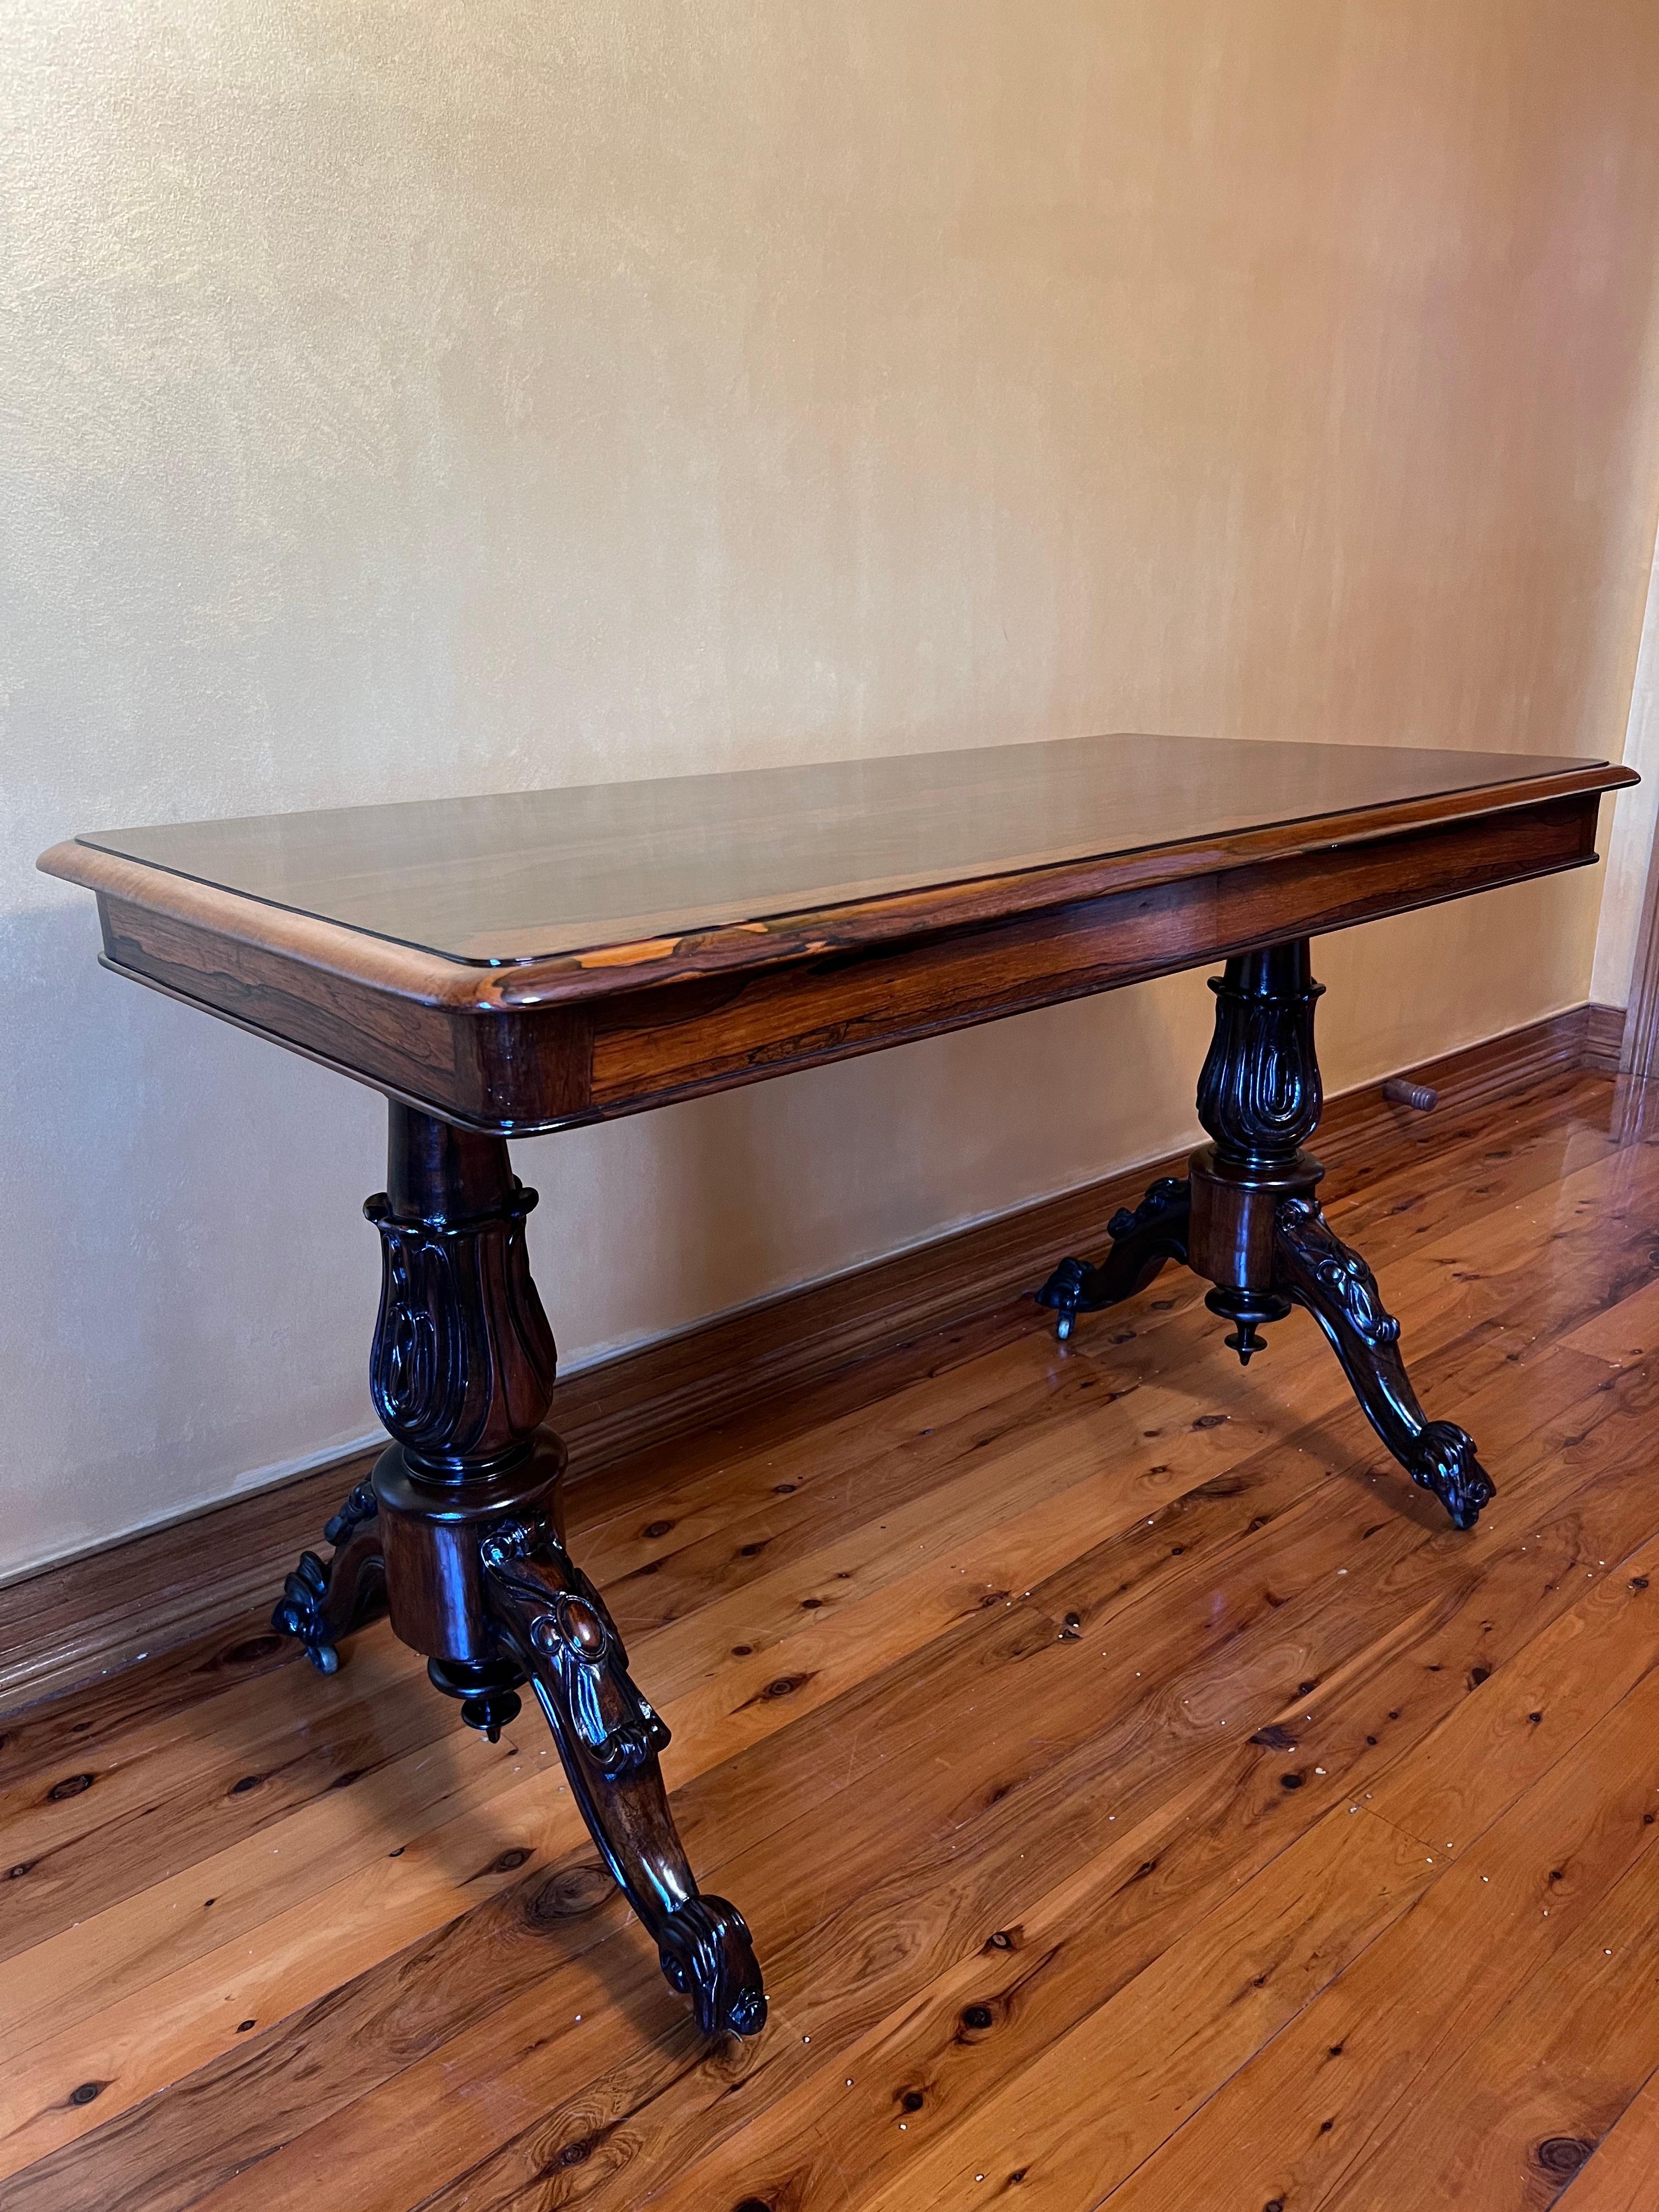 Smooth gloss table top finish, detailed carvings to legs and feet of table, comes with castors.

circa: 1870

Material: Rosewood

Country of Origin: England

Measurements: 73cm high, 63cm width, 121cm length

Pick Up Location at: 64 Kalang